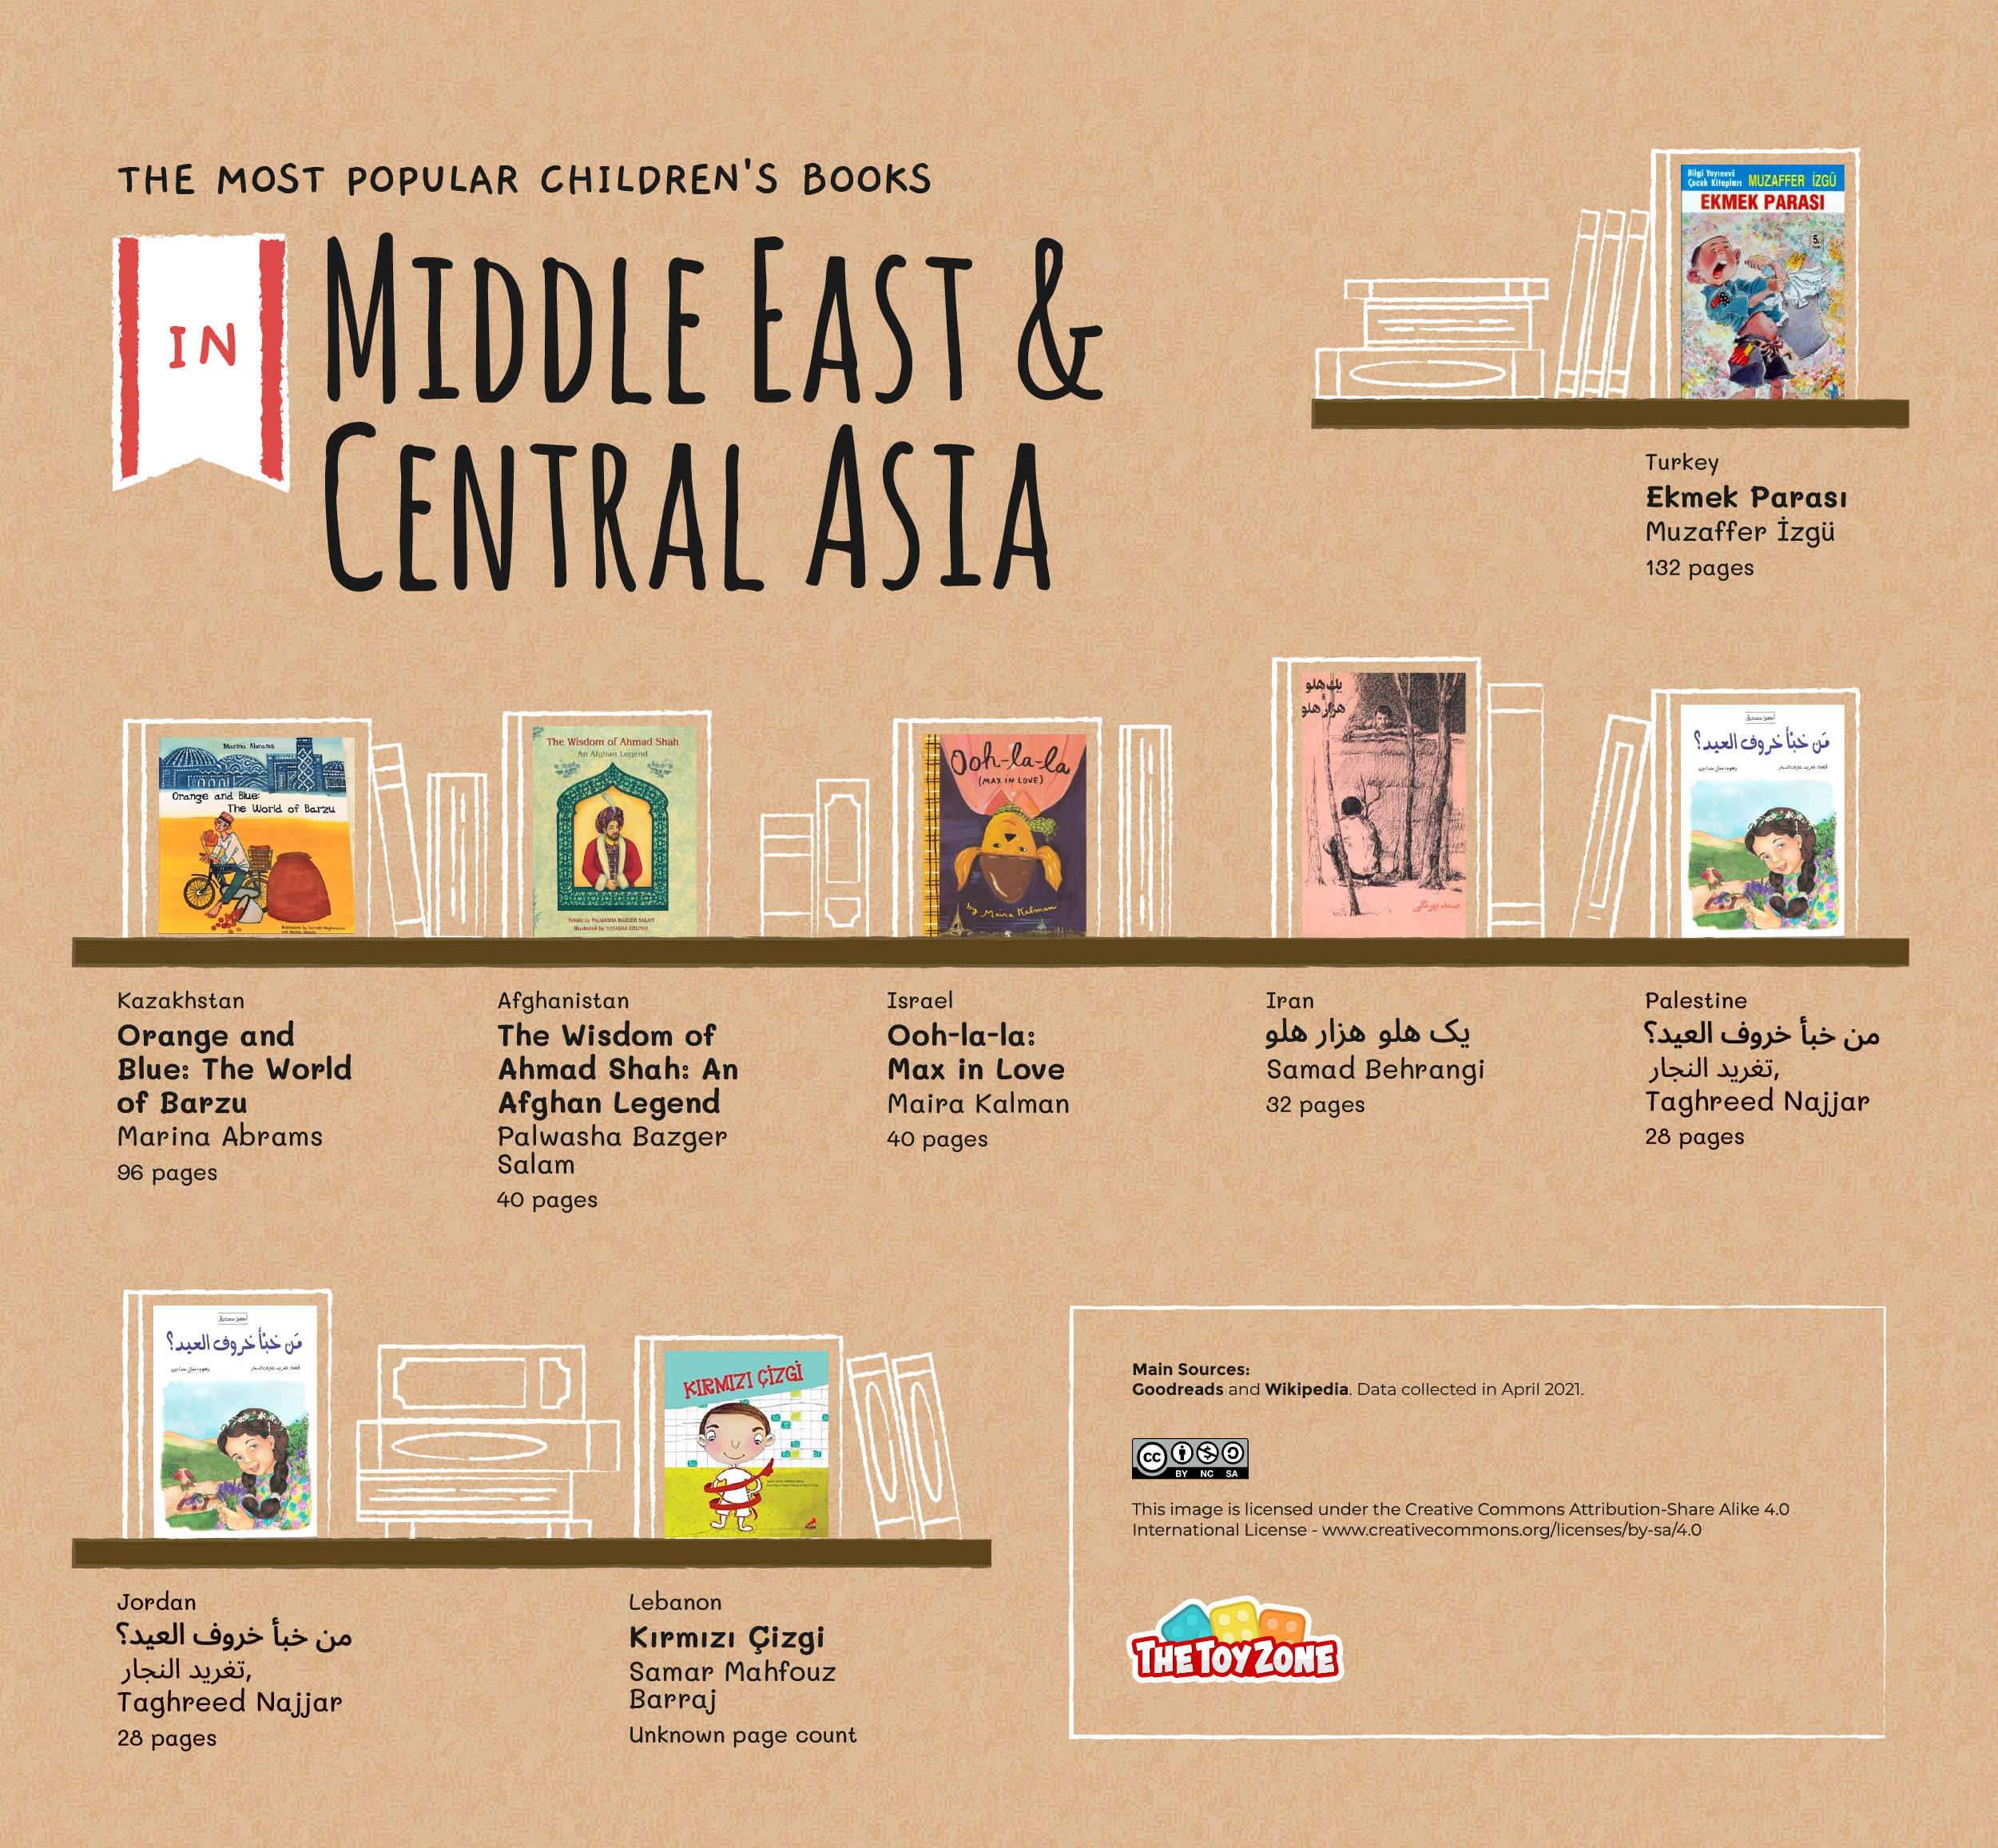 Most popular children's books in the Middle East and Central Asia